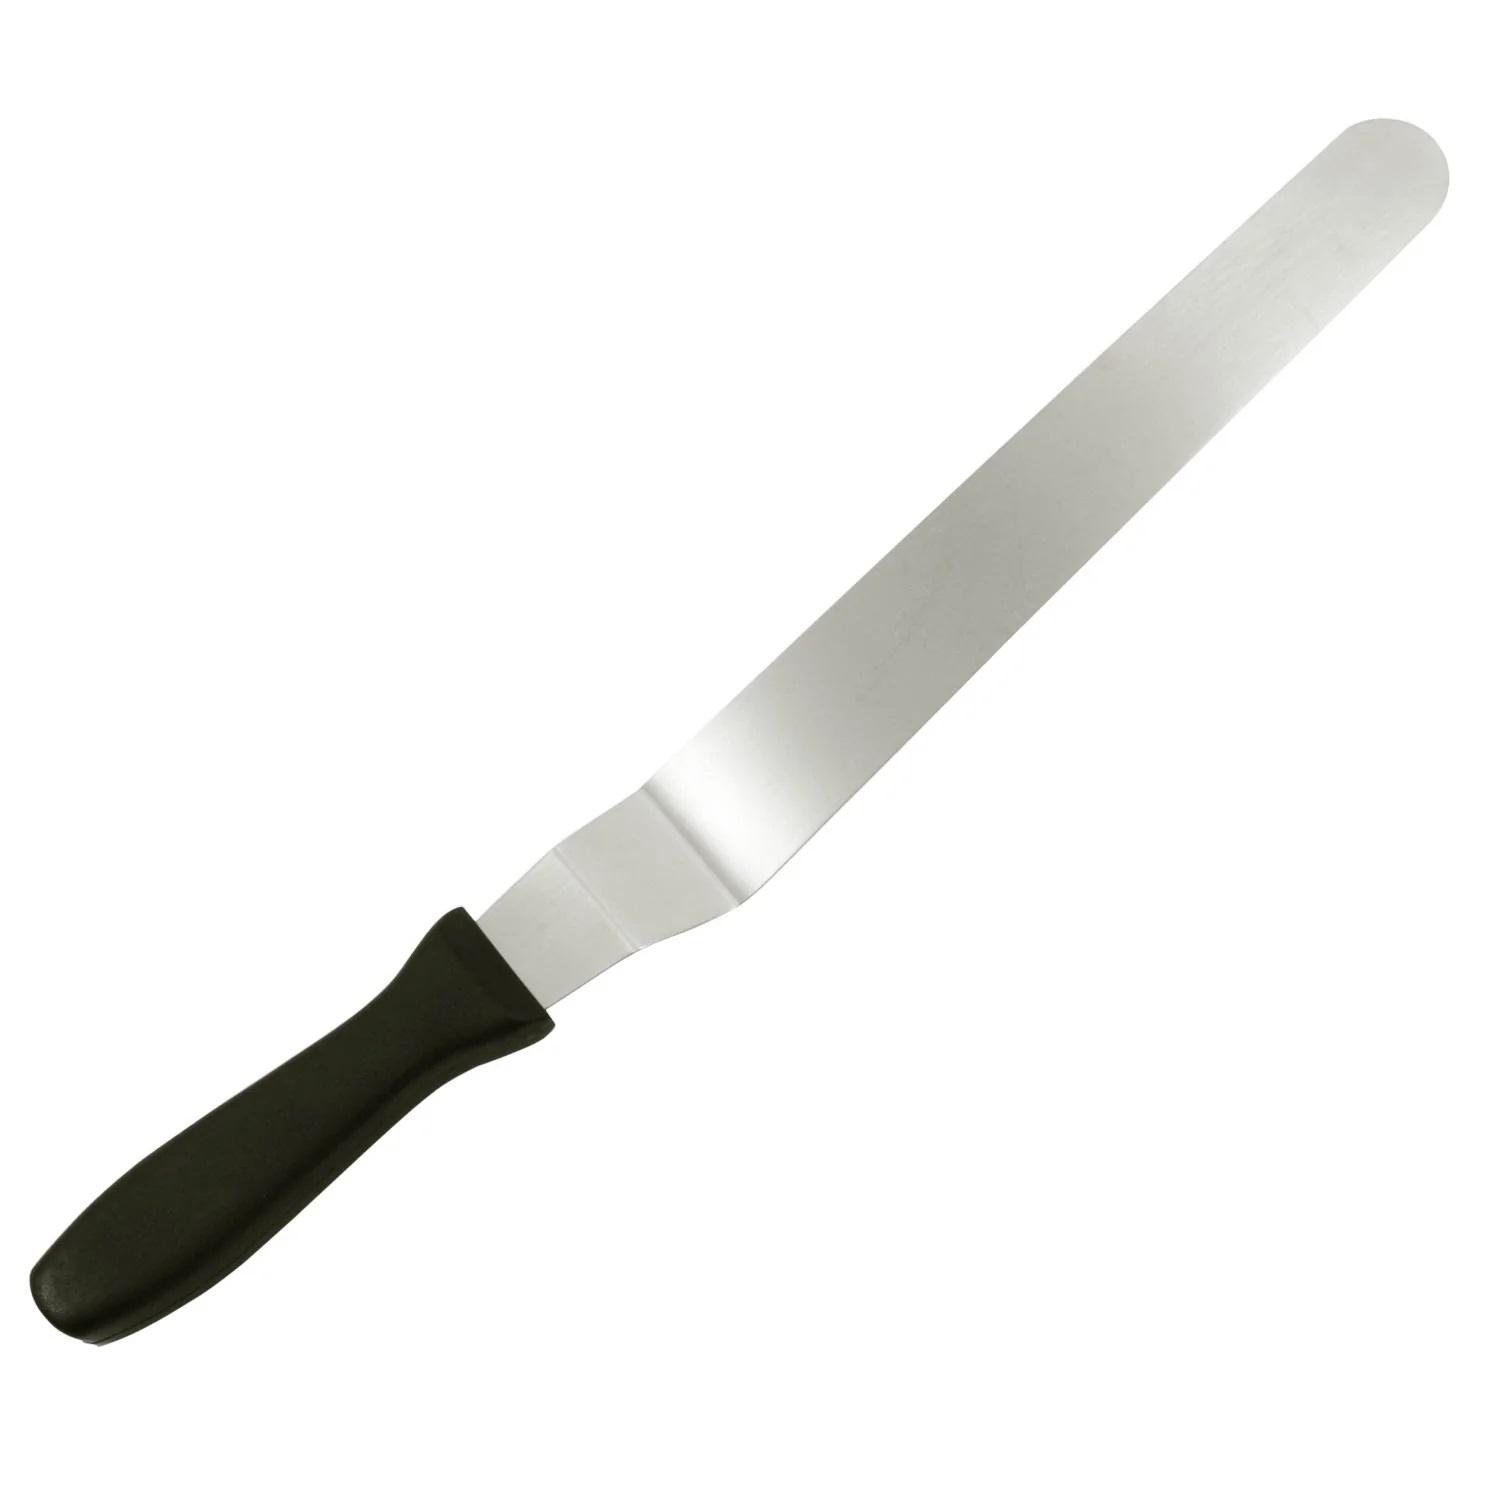 What Is A Straight Edge Spatula Used For